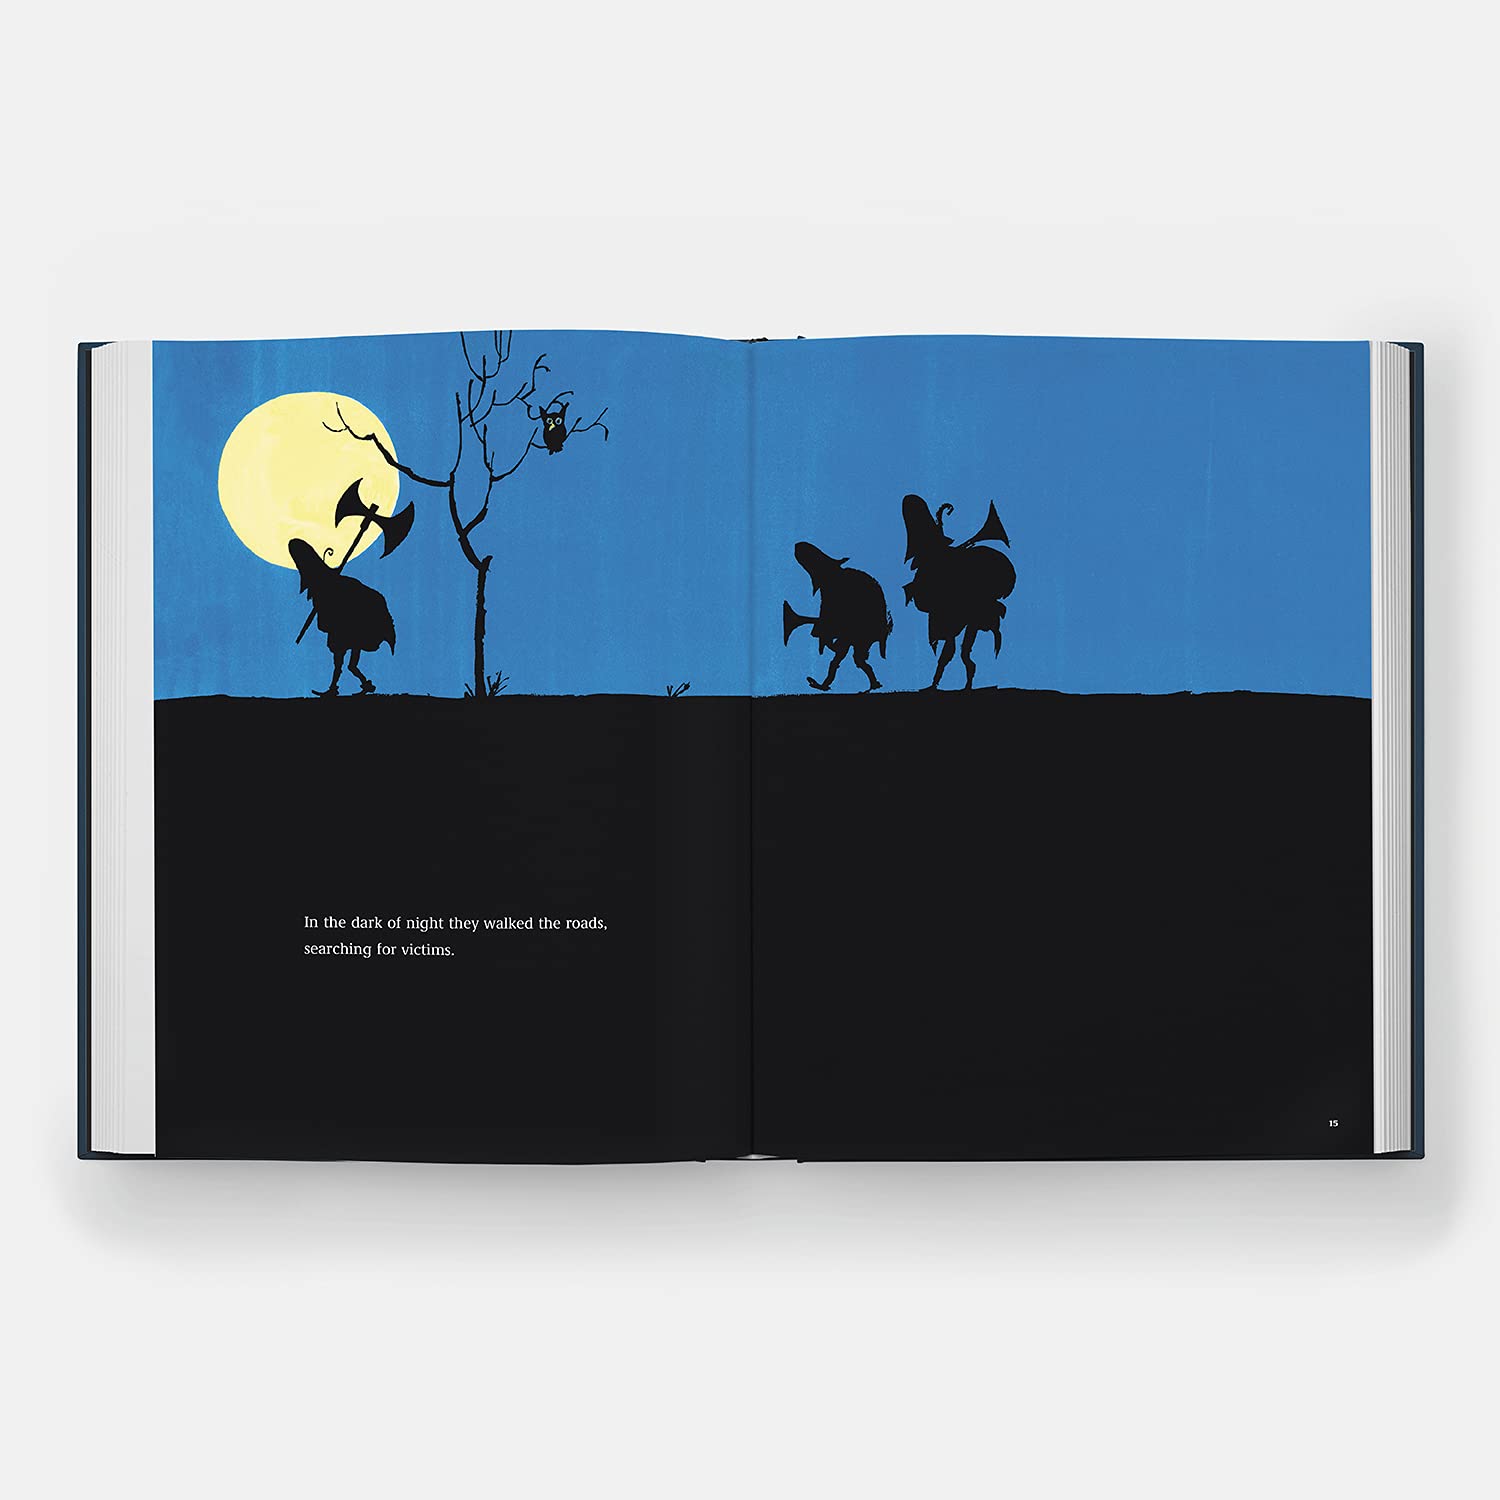 Tomi Ungerer: A Treasury of 8 Books | Tomi Ungerer